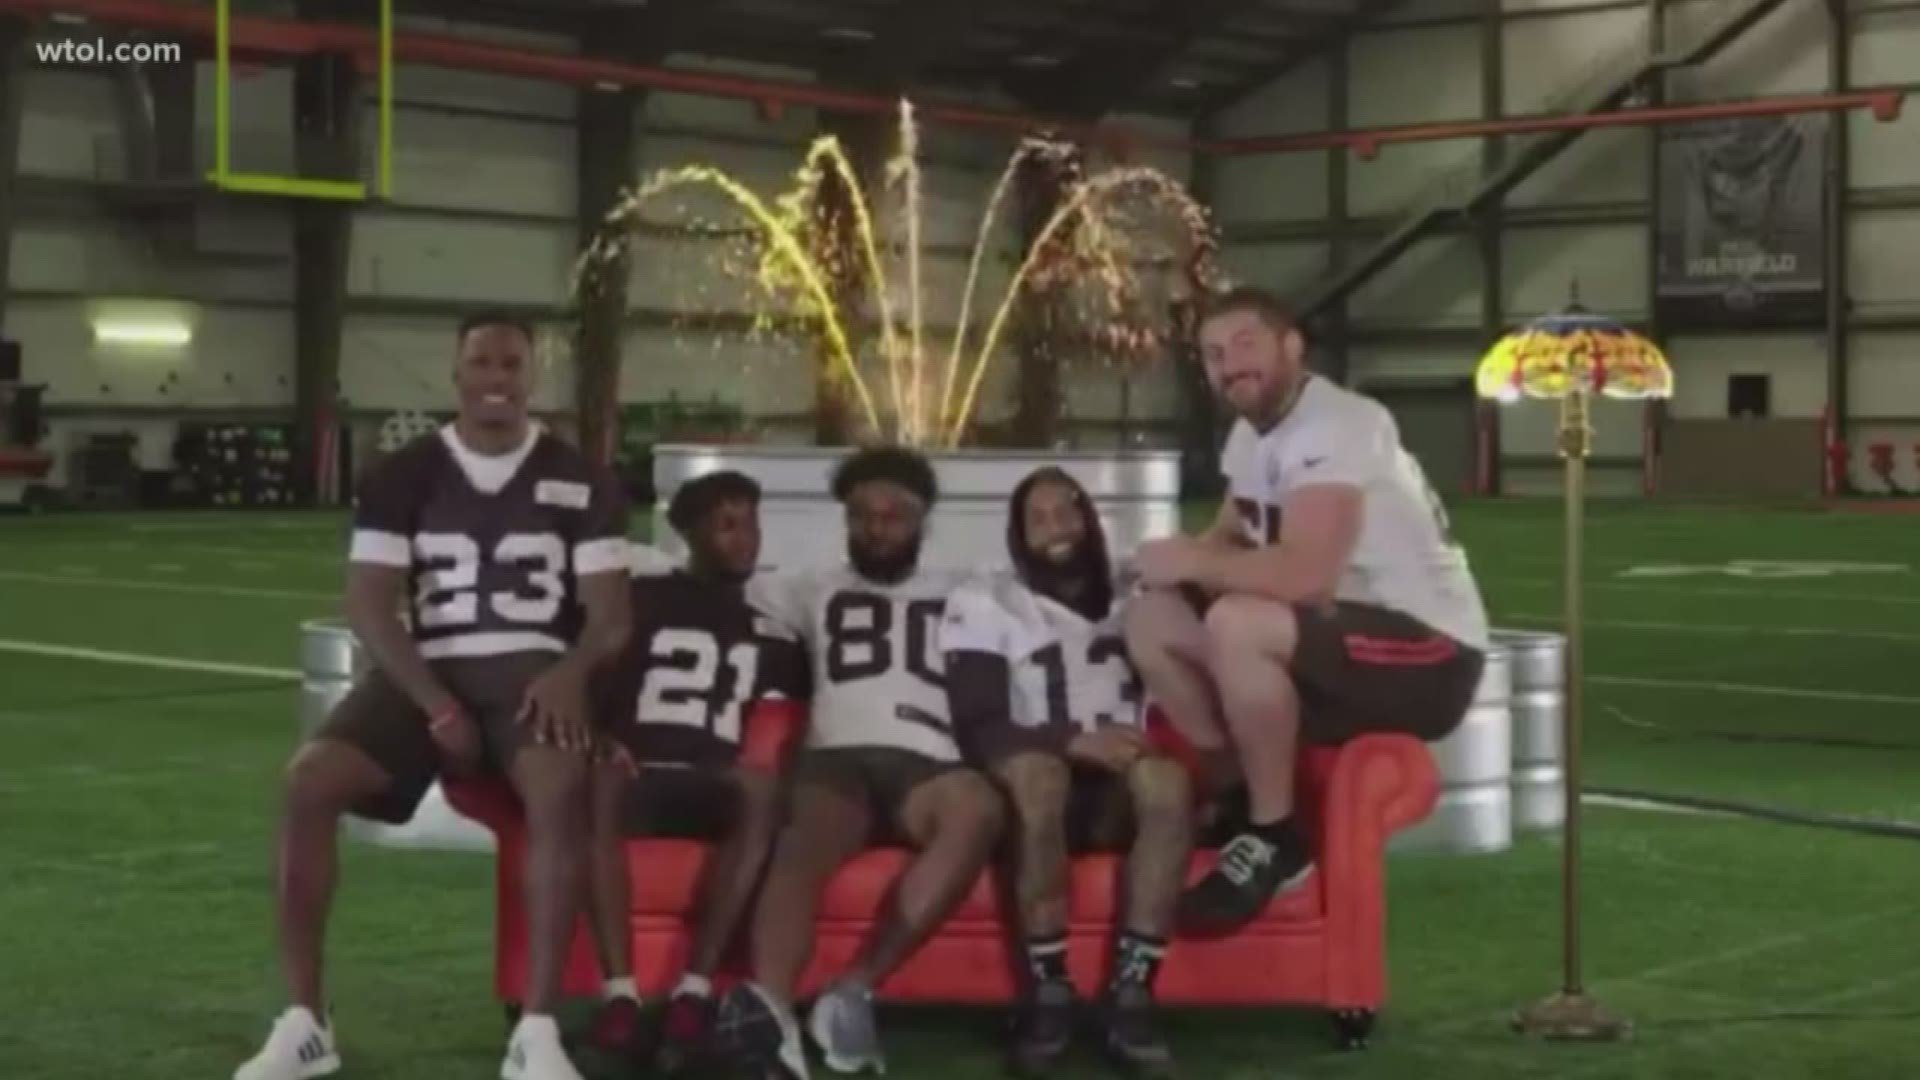 The Cleveland Browns are on Cloud Nine after securing their first win of the season last night. They celebrated the win in amazing fashion by tweeting out this mashup of the 'Friends' theme song featuring some of their players.